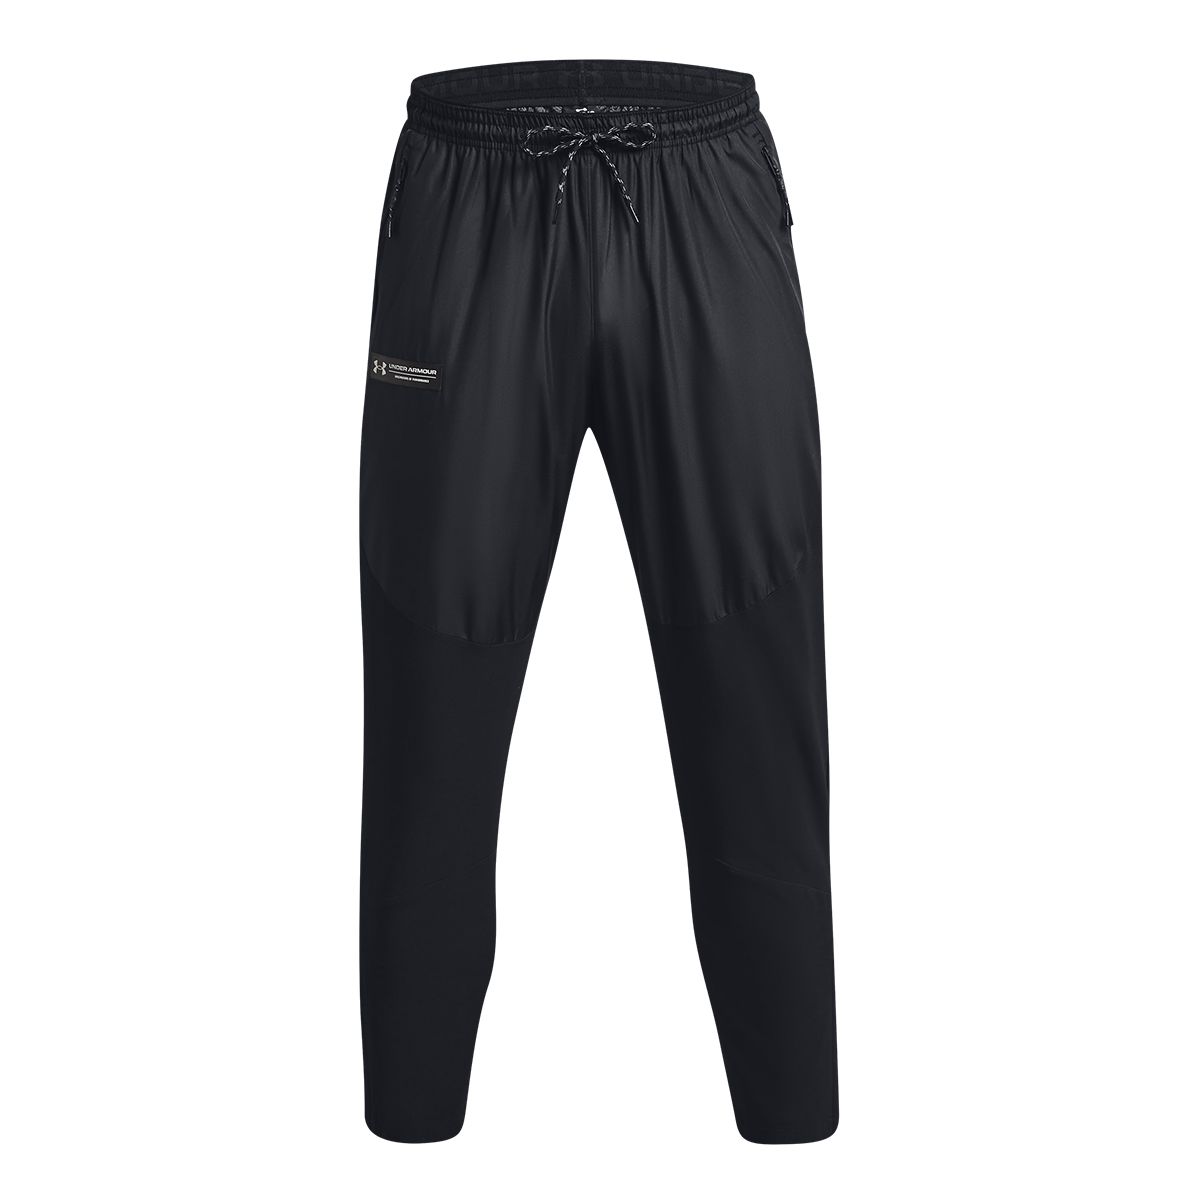 Under Armour Rush Woven Pant Mens